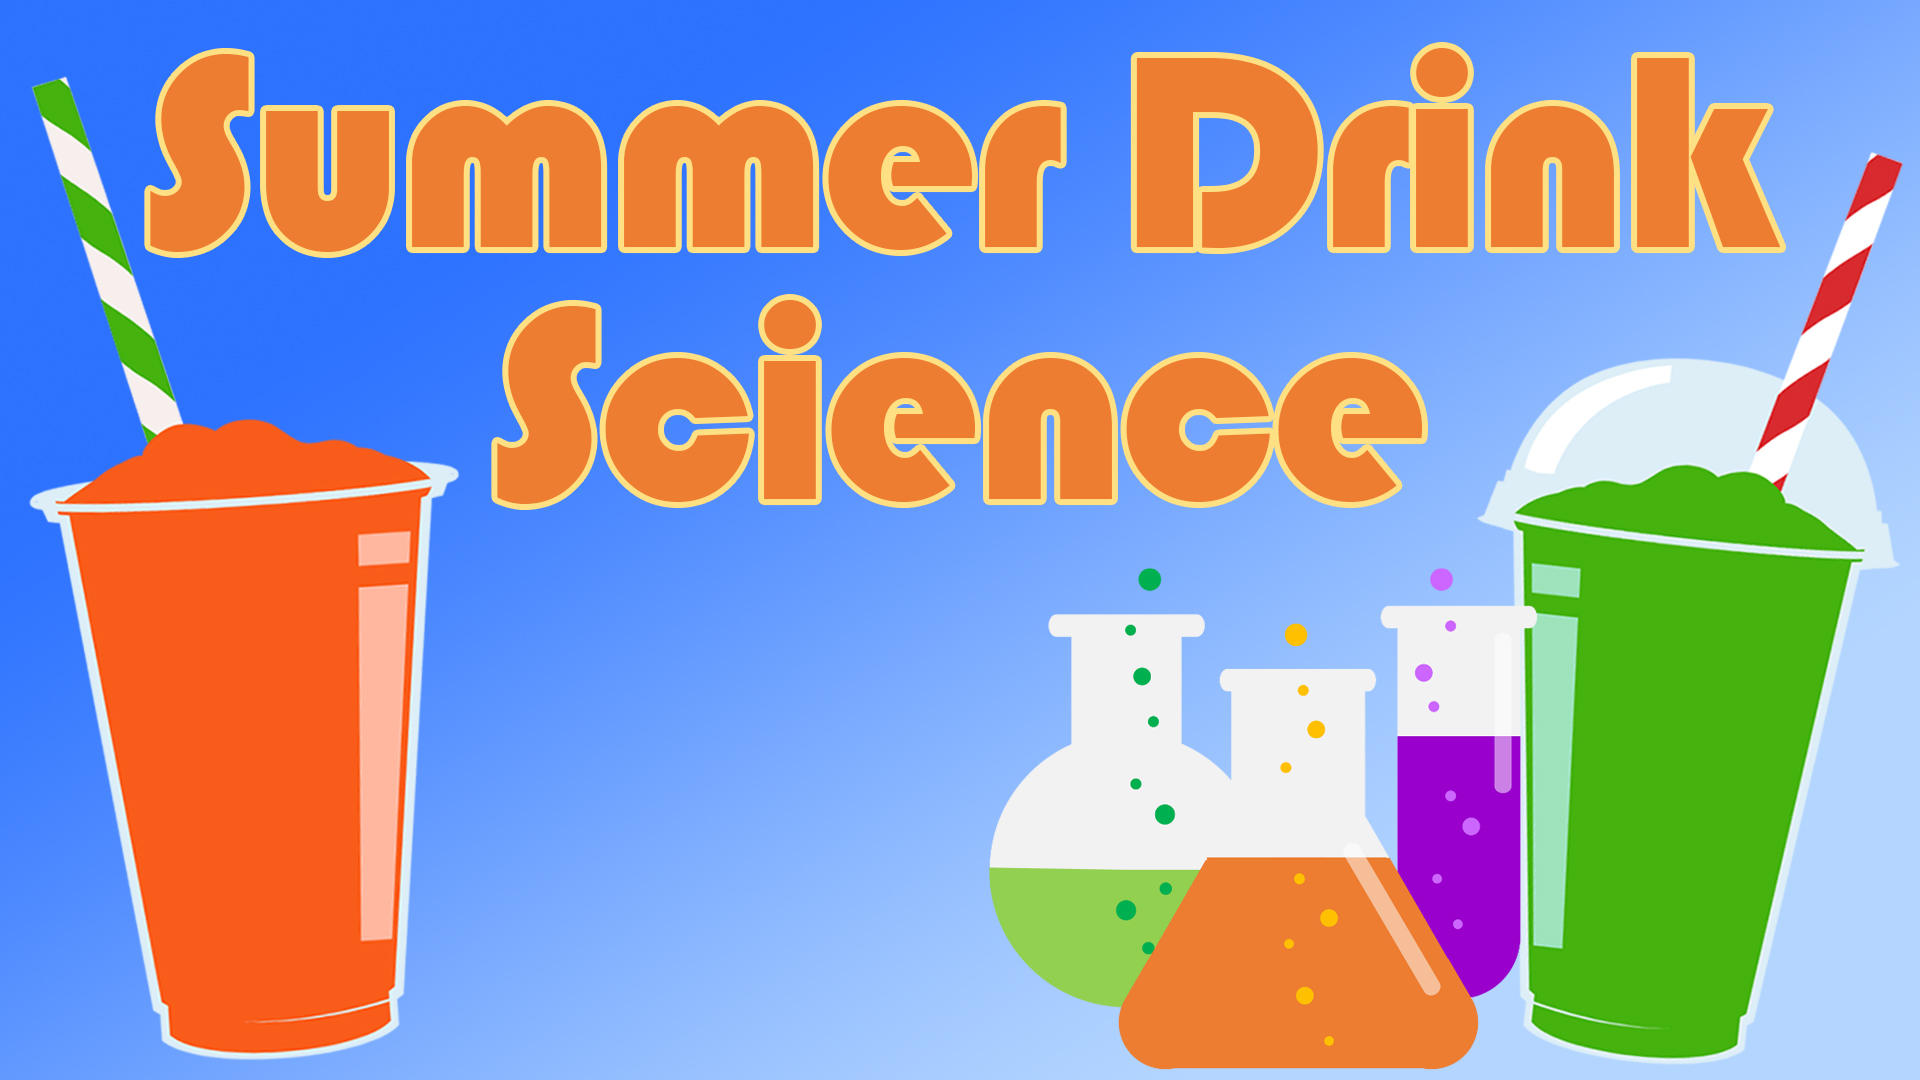 Image reads "Summer Drink Science" against a blue gradient background. A red slushie is to the left of the title. A green slushie and three science beakers are to the right of the title.